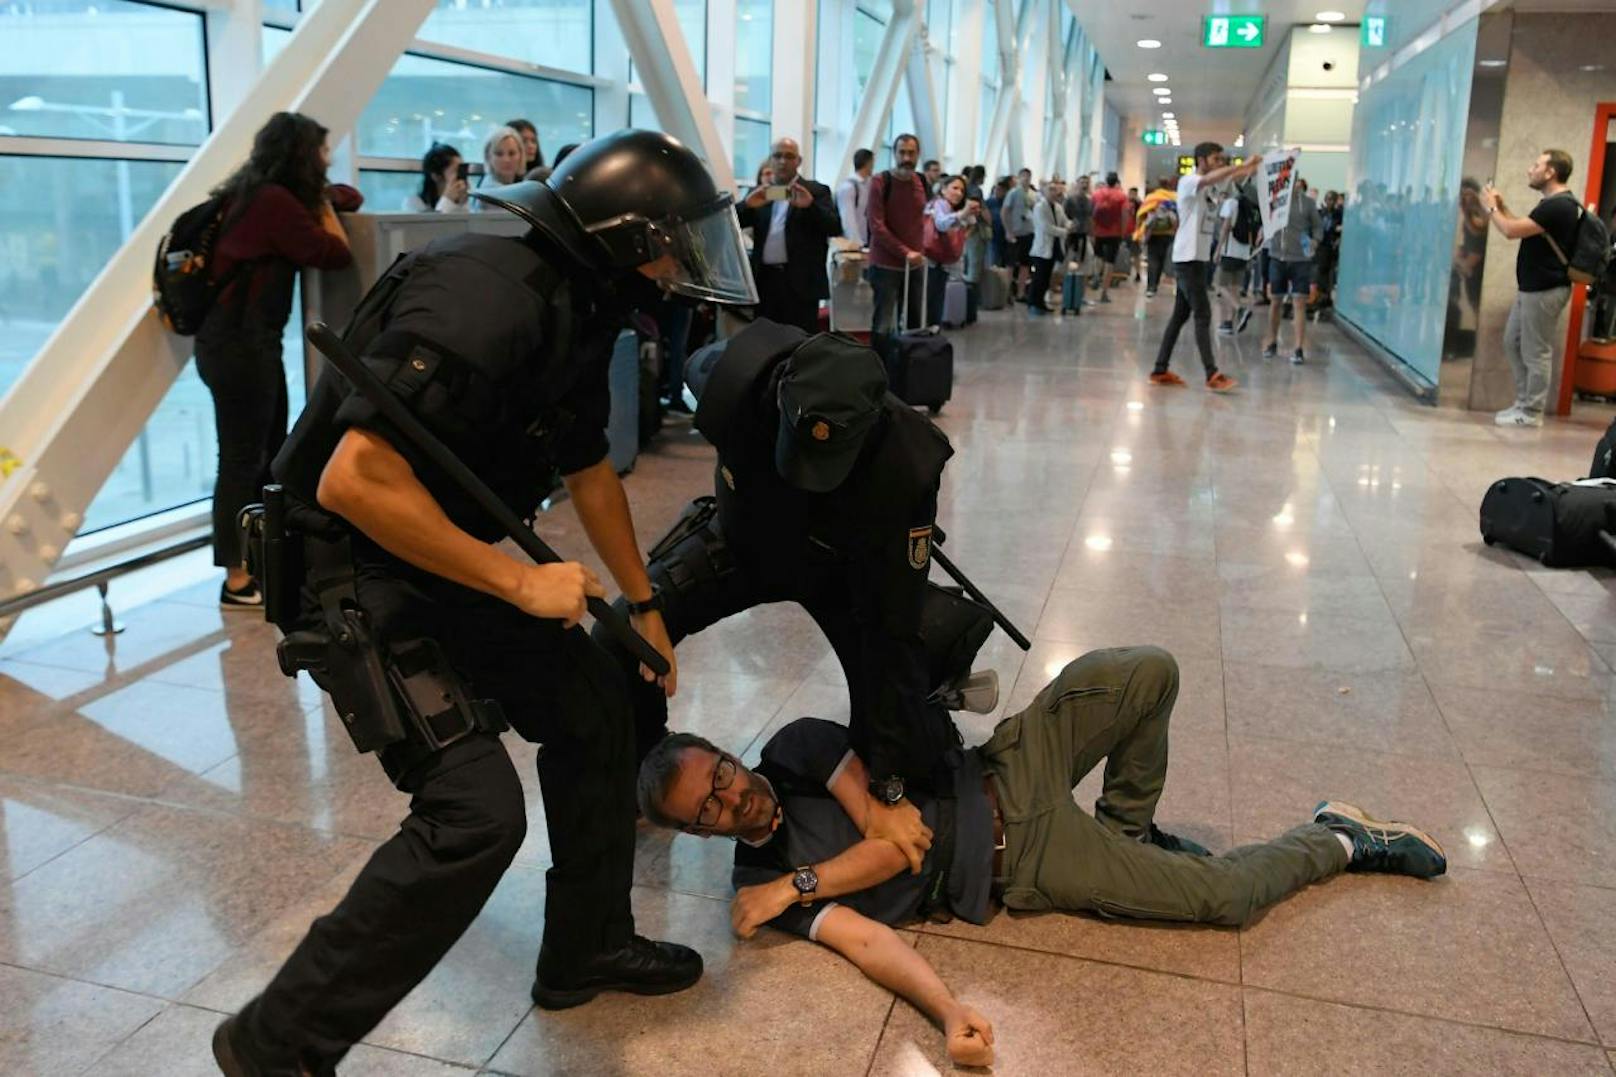 Download von www.picturedesk.com am 14.10.2019 (18:48). 
Spanish policemen grab a protester inside El Prat airport in Barcelona on October 14, 2019 as thousands of angry protesters took to the streets after Spain's Supreme Court sentenced nine Catalan separatist leaders to between nine and 13 years in jail for sedition over the failed 2017 independence bid. - As the news broke, demonstrators turned out en masse, blocking streets in Barcelona and elsewhere as police braced for what activists said would be a mass response of civil disobedience. (Photo by LLUIS GENE / AFP) - 20191014_PD6876 - Rechteinfo: Nur für redaktionelle Nutzung! - Editorial Use Only! Werbliche Nutzung nur nach Freigabe!